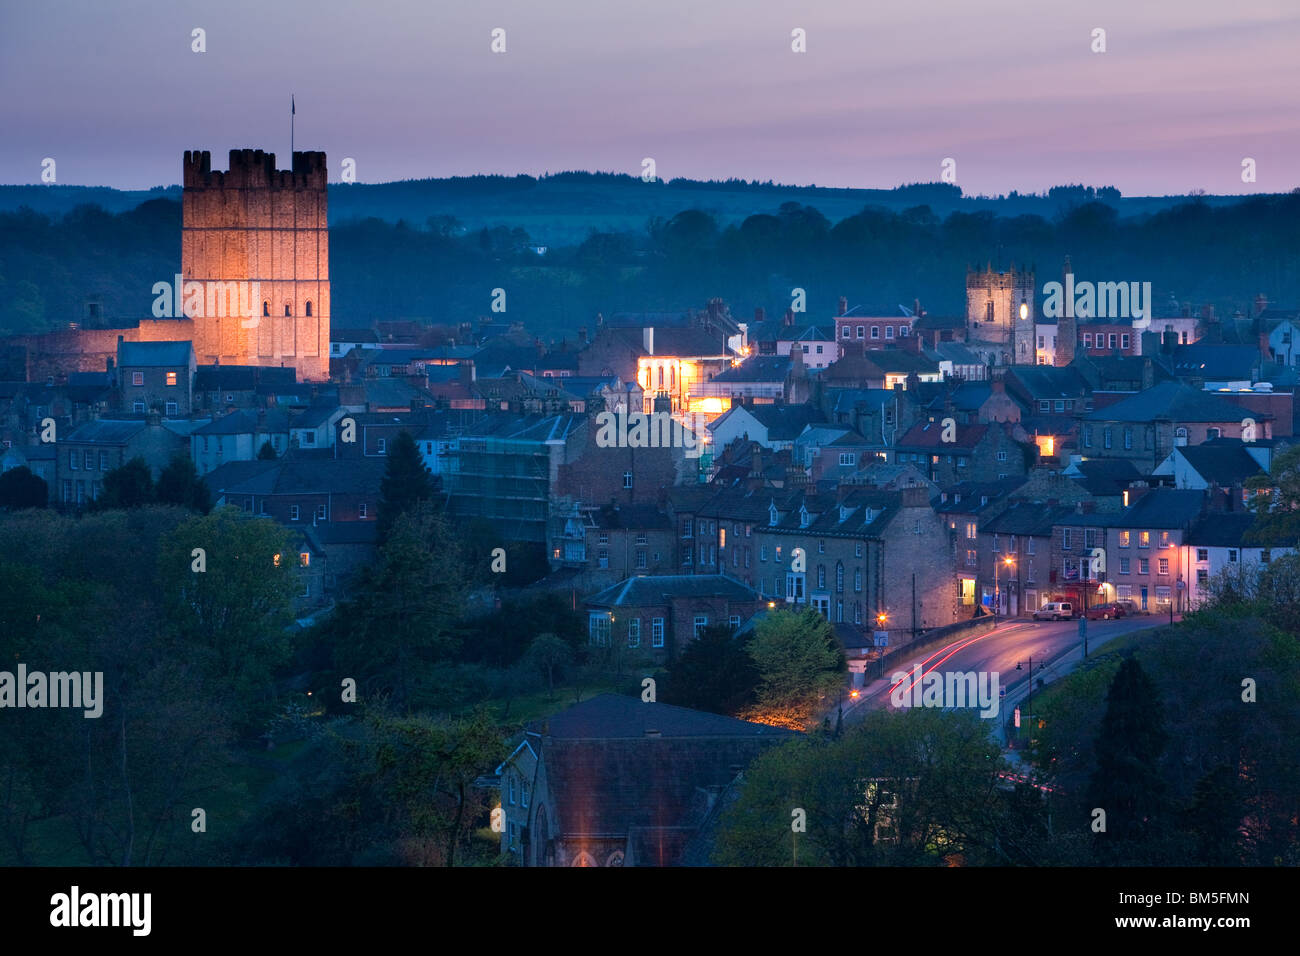 Dusk in historic Richmond showing the floodlit castle North Yorkshire, England Stock Photo